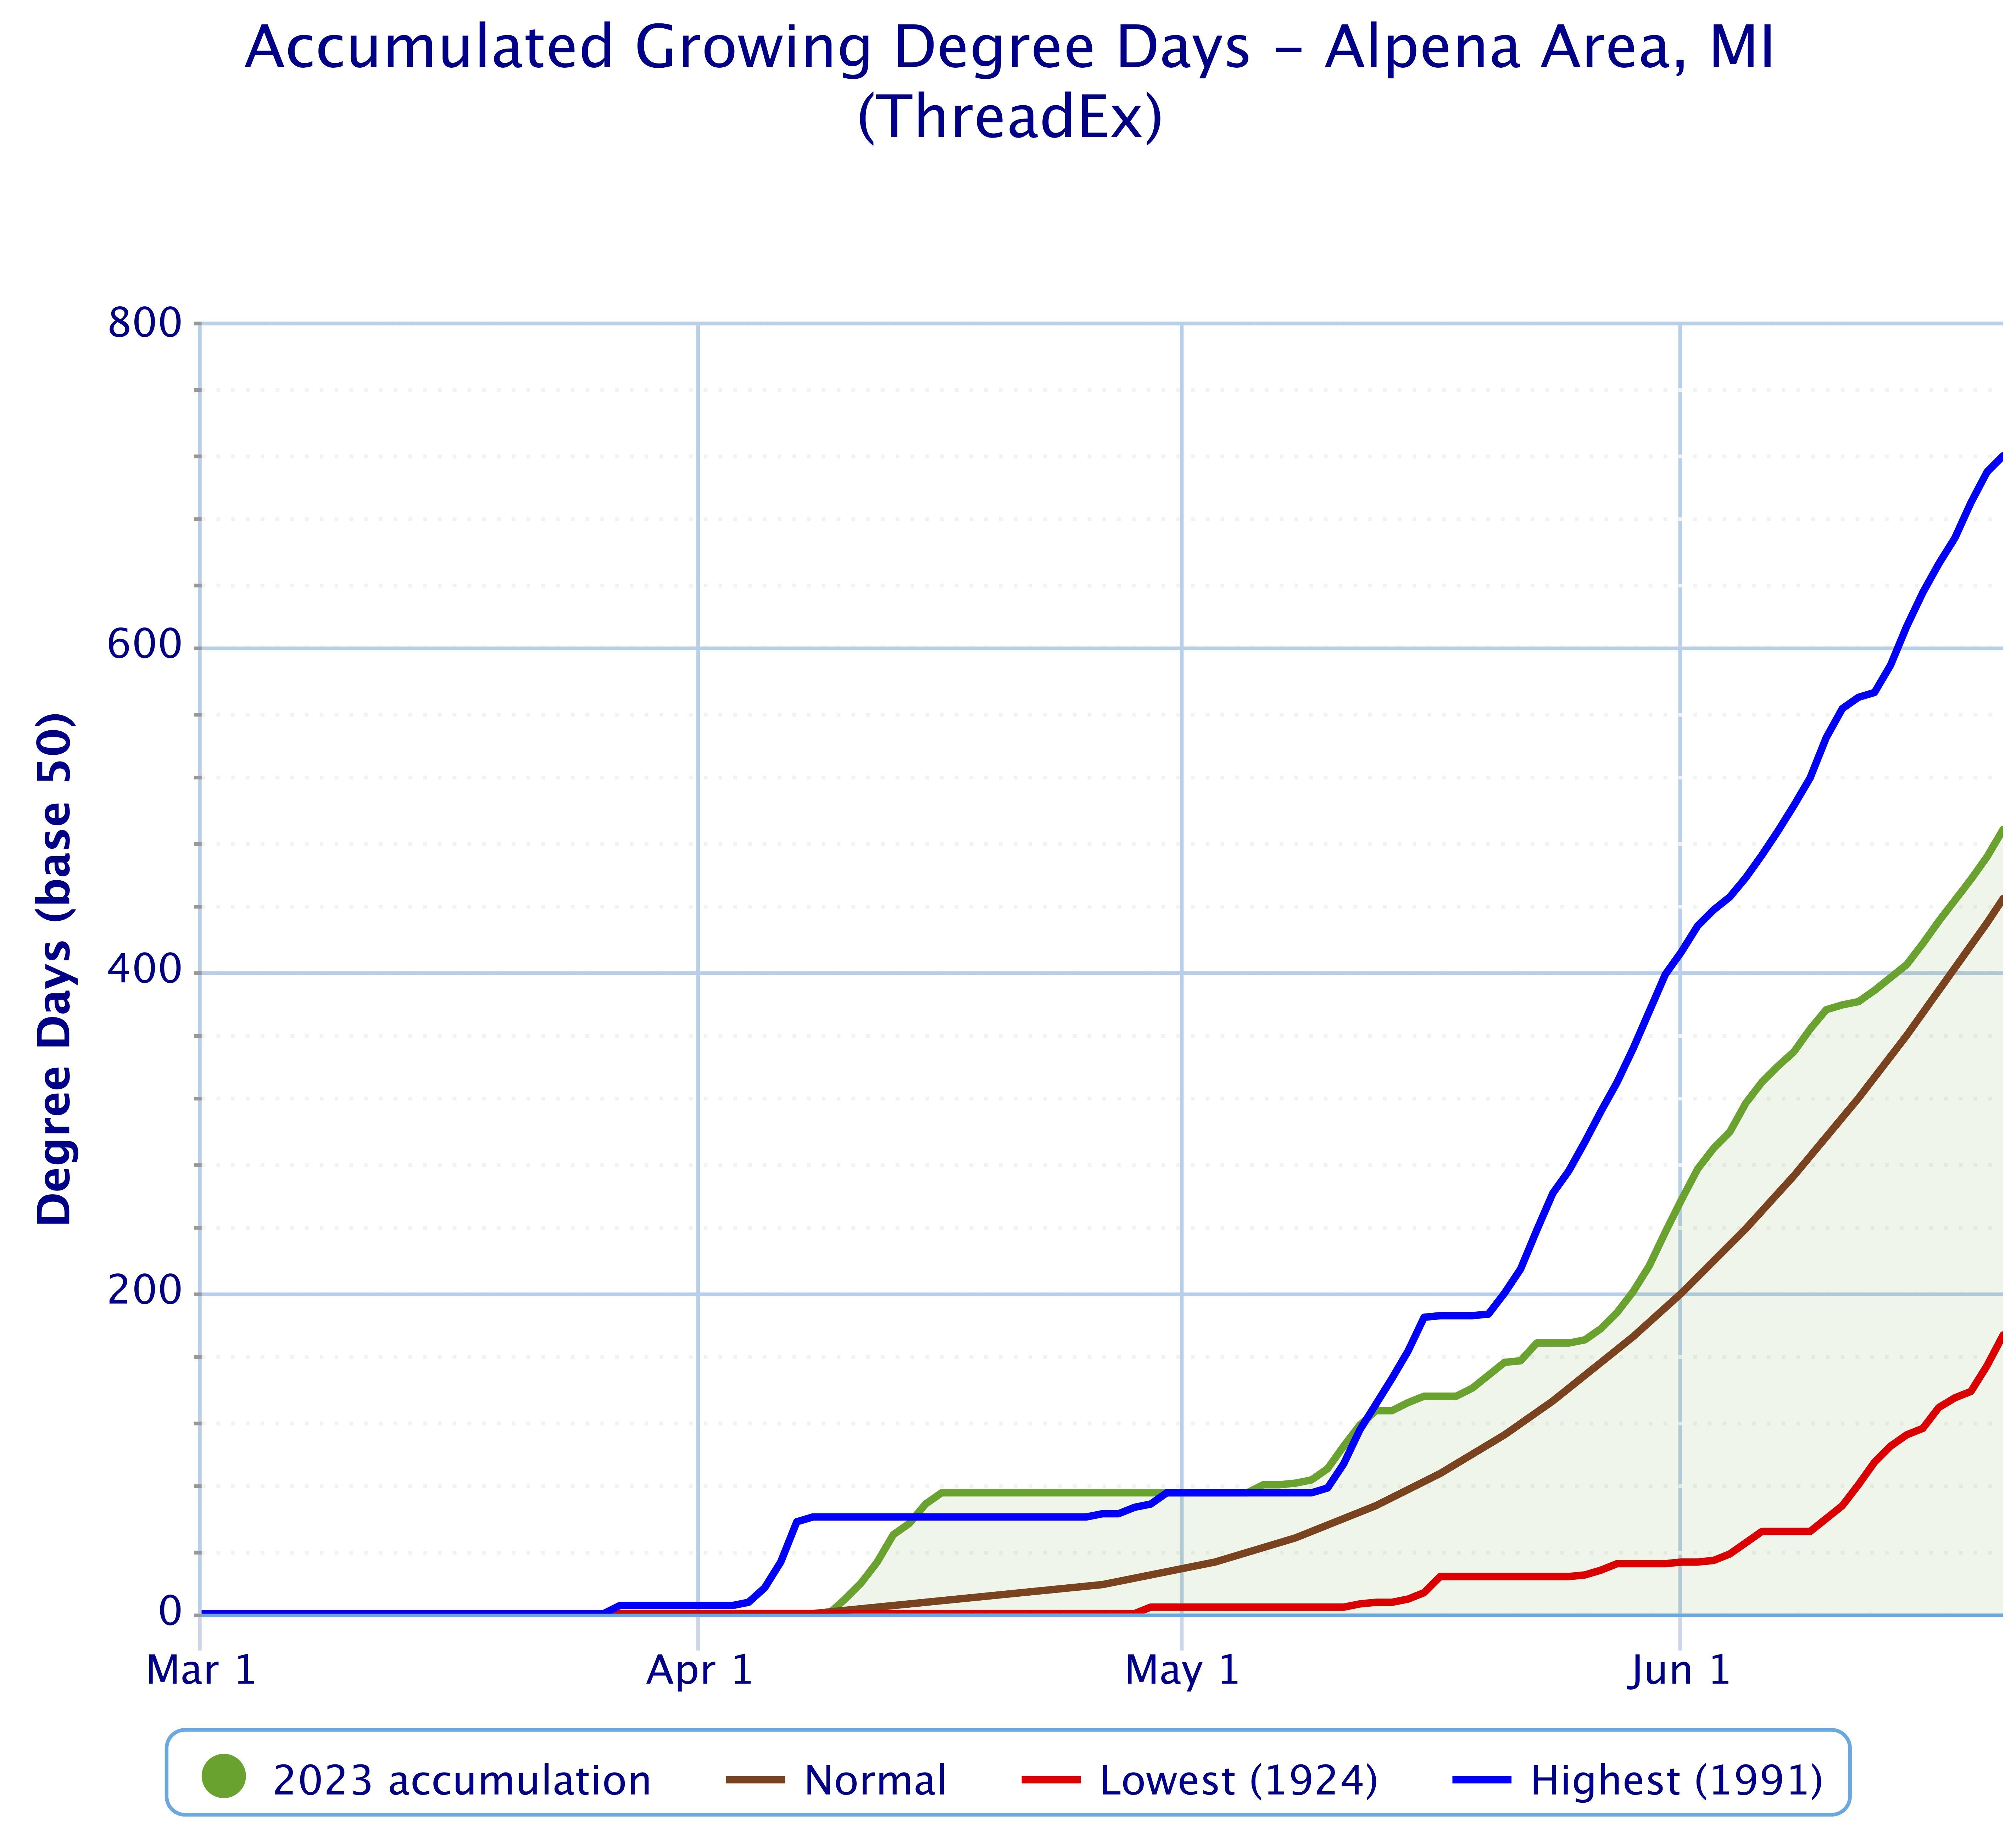 Accumulated Growing Degree Day Chart that shows accumulated growing degree days (Base 50) compared to highest, lowest, and normal